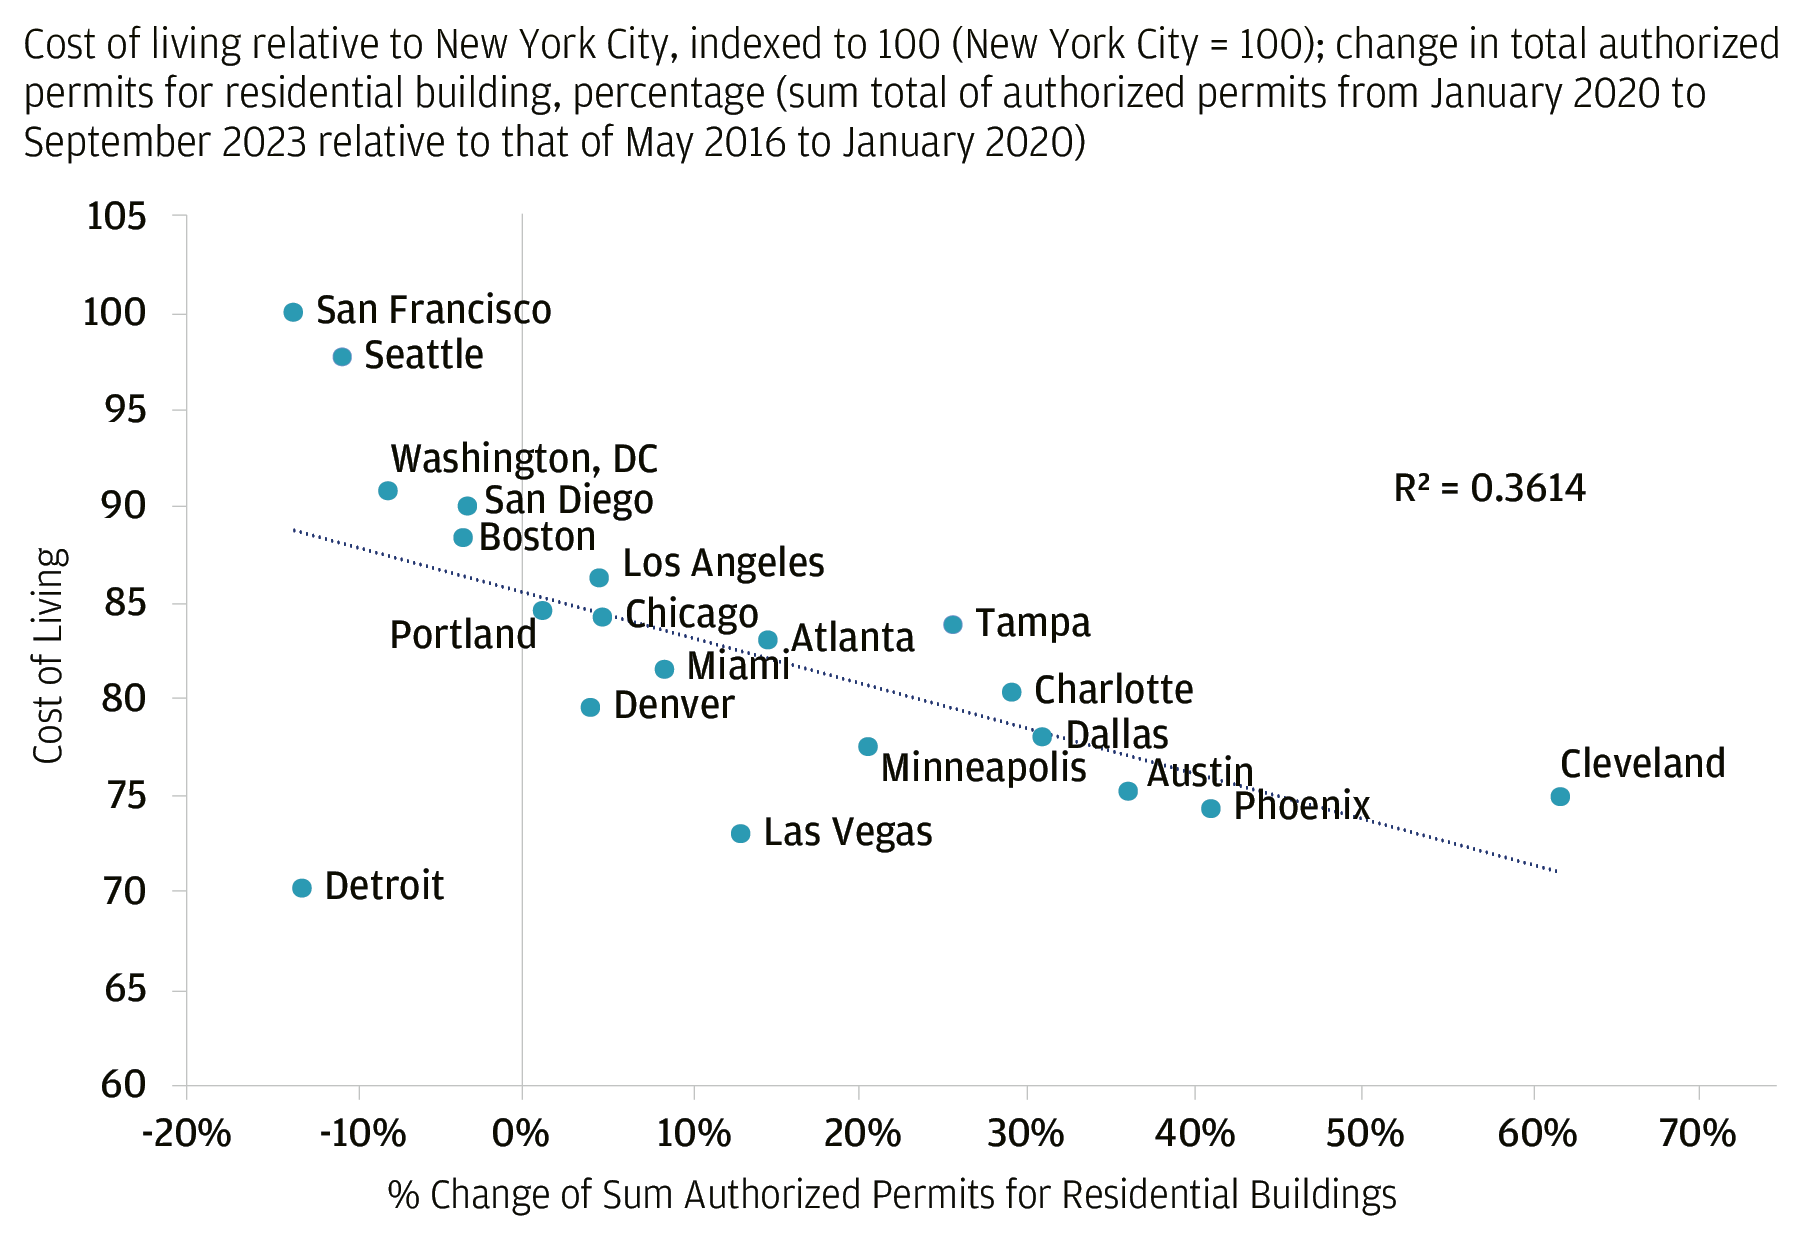 A scatter plot shows generally cities with a higher cost of living (San Francisco, Seattle, Washington, DC, Boston, San Diego, Portland) have fewer than average new permits for residential buildings in recent years, while lower cost of living cities (including Cleveland, Phoenix, Austin, Dallas, Minneapolis, Charlotte) have seen an increase in building permits.